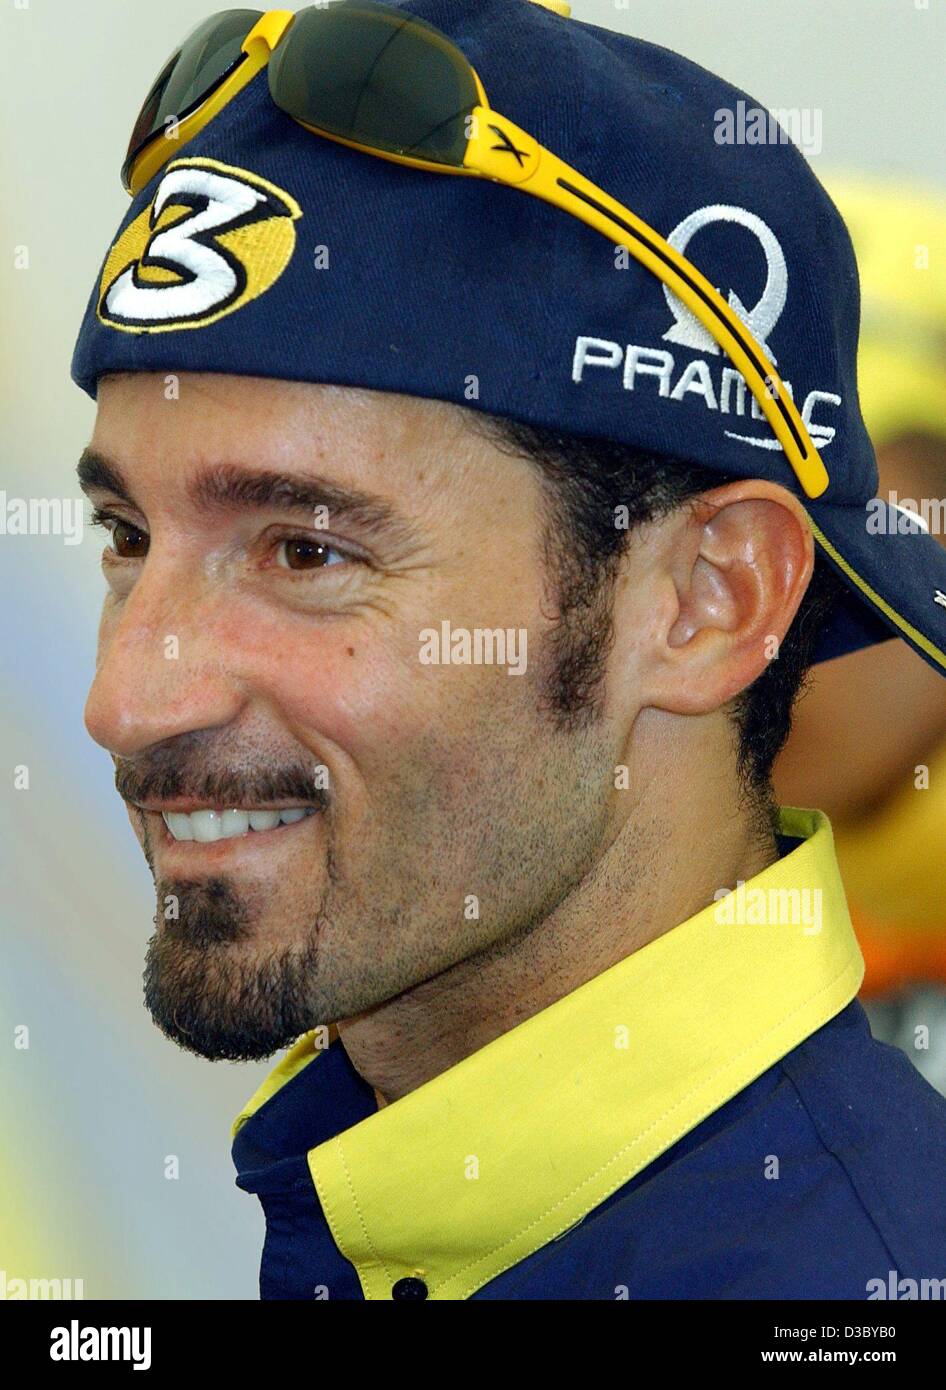 dpa) - Italian motorcycling race driver Max Biaggi, pictured during the  motorcycling Grand Prix on the Sachsenring near Hohenstein-Ernstthal,  Germany, 27 July 2003. Biaggi drives in the MotoGP class Stock Photo - Alamy